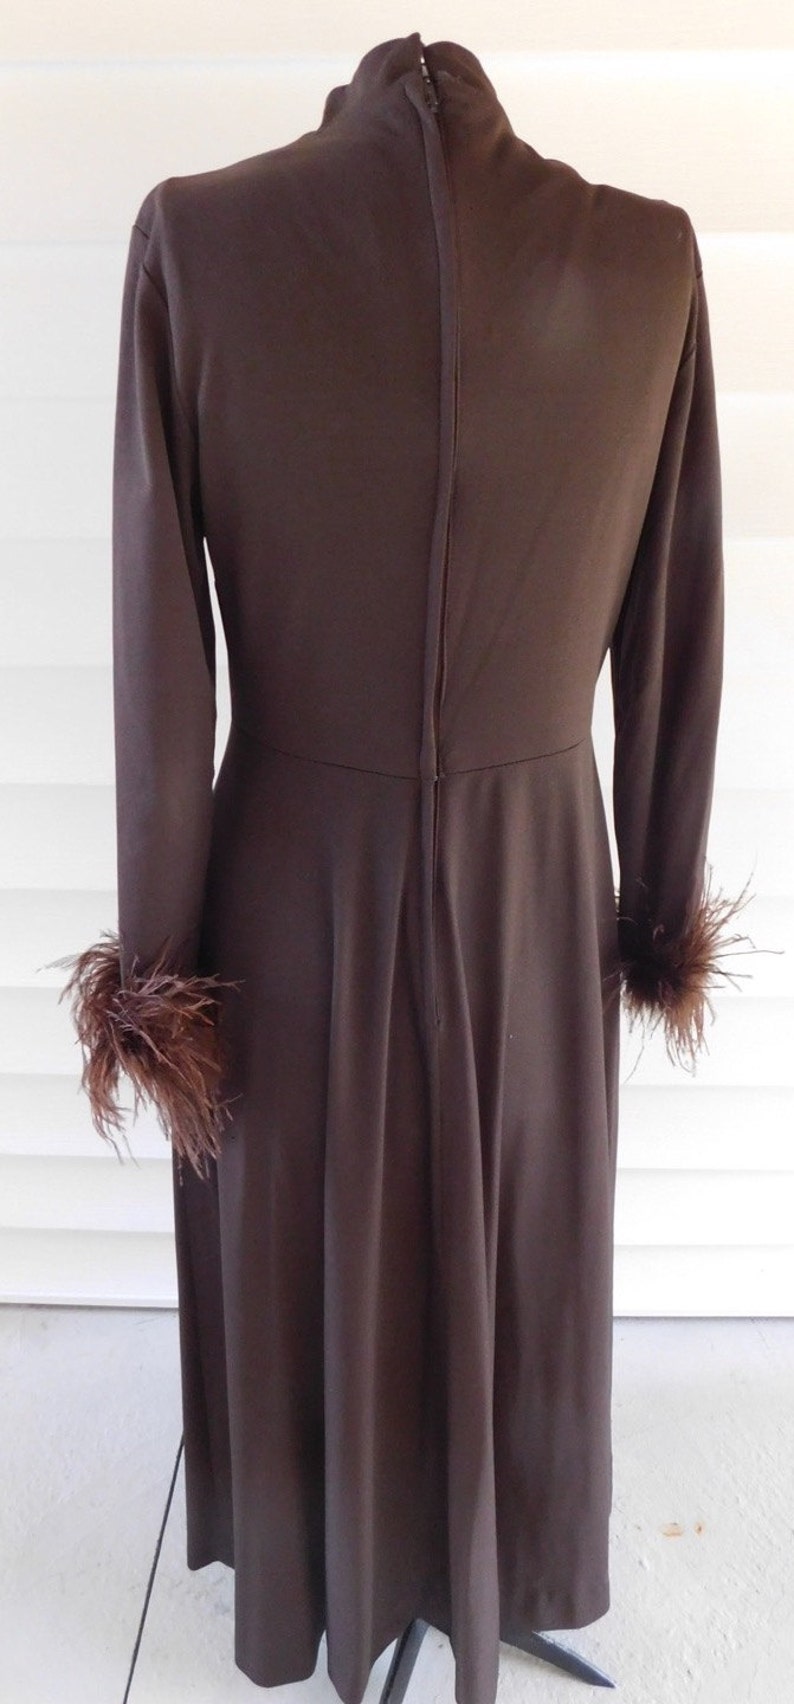 Vintage 1970s Maxi Dress with Feather Cuffs Chocolate Brown Vintage Loungewear image 3